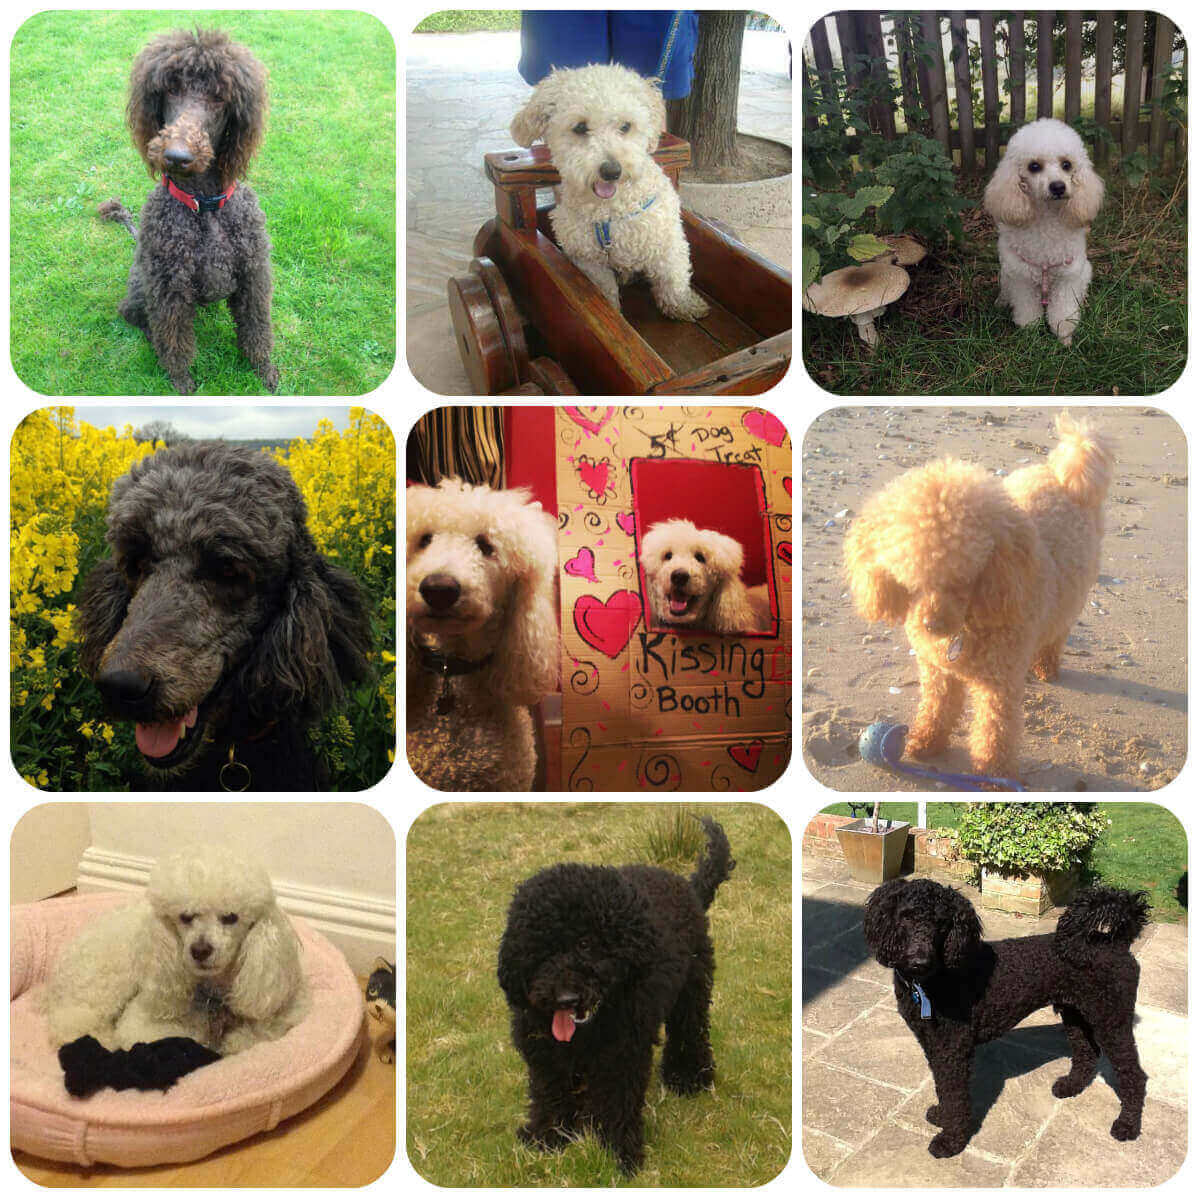 A collage of images of Poodles. They range in size and colour but are all quite slim with very curly coats.